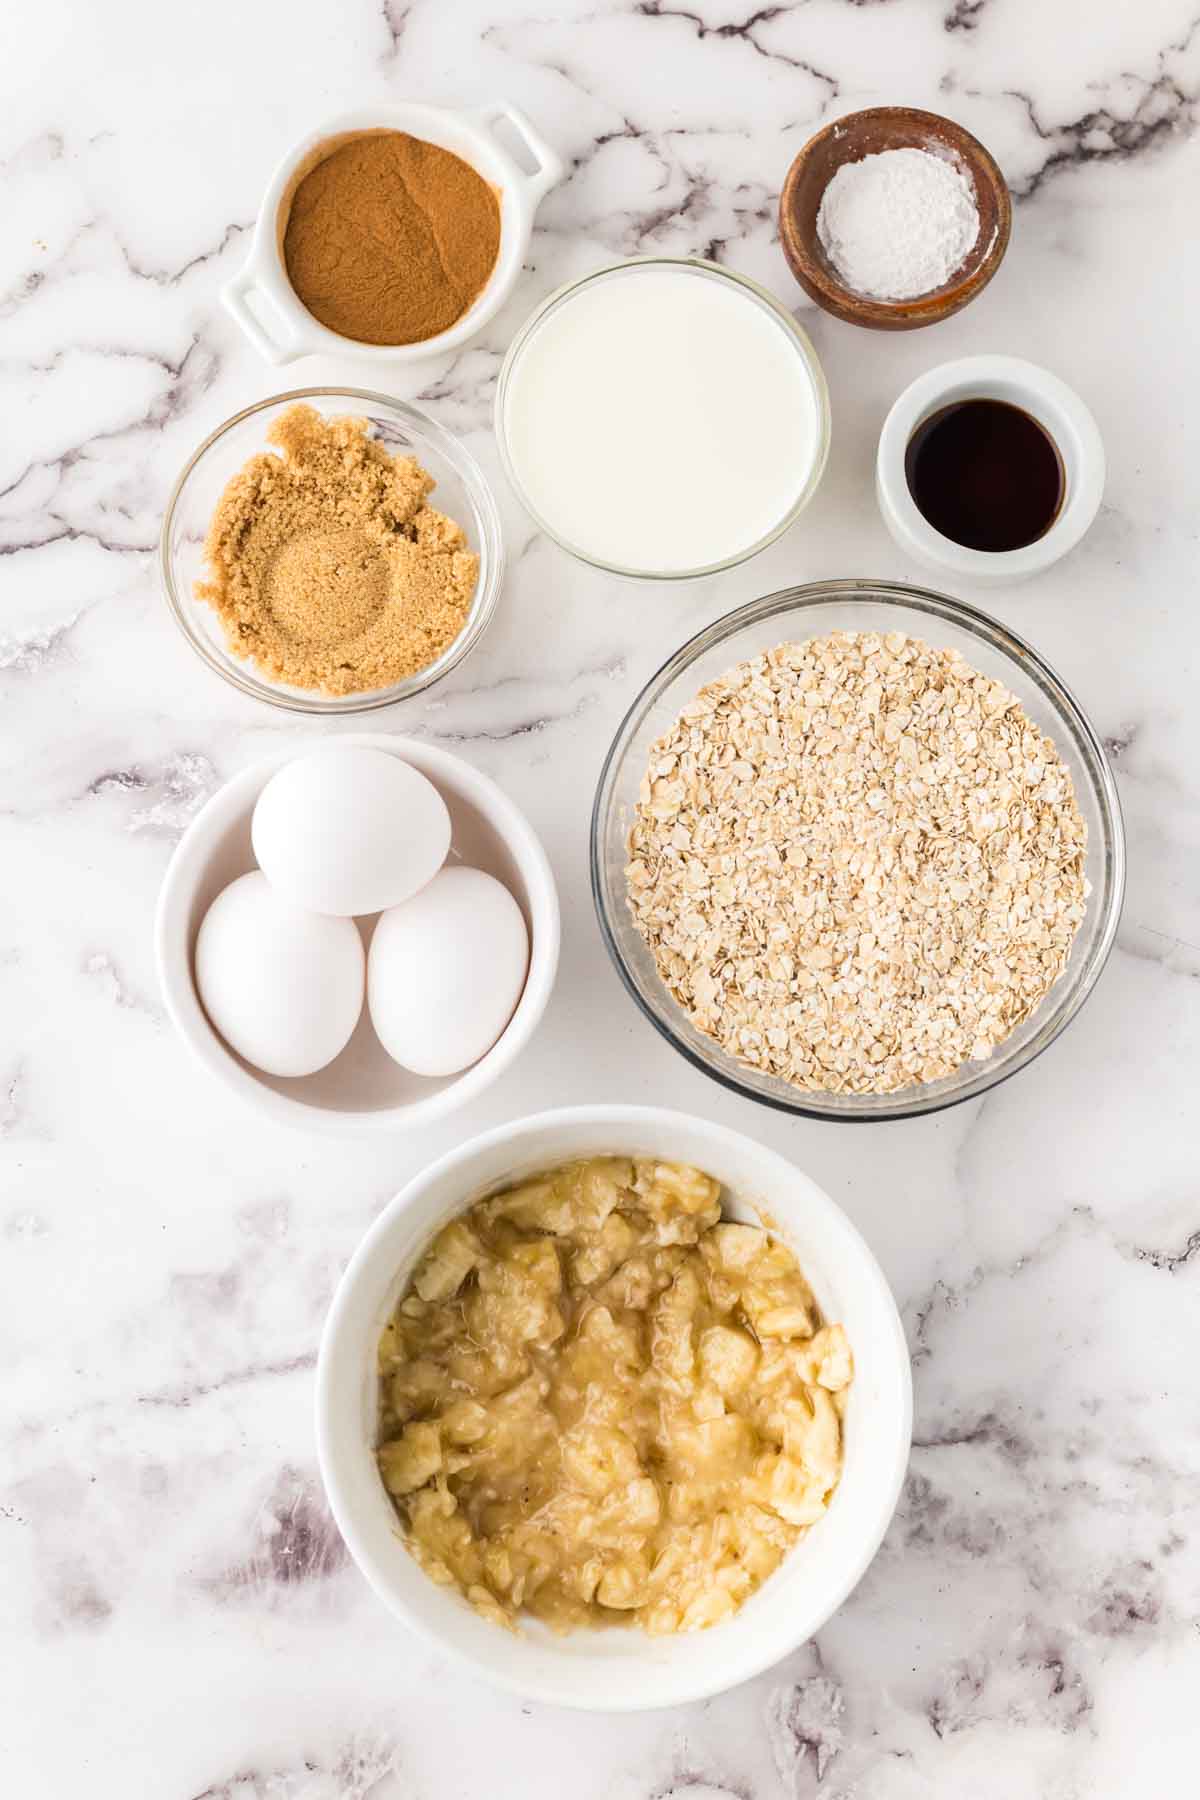 small portion dishes of banana oatmeal pancake recipe ingredients